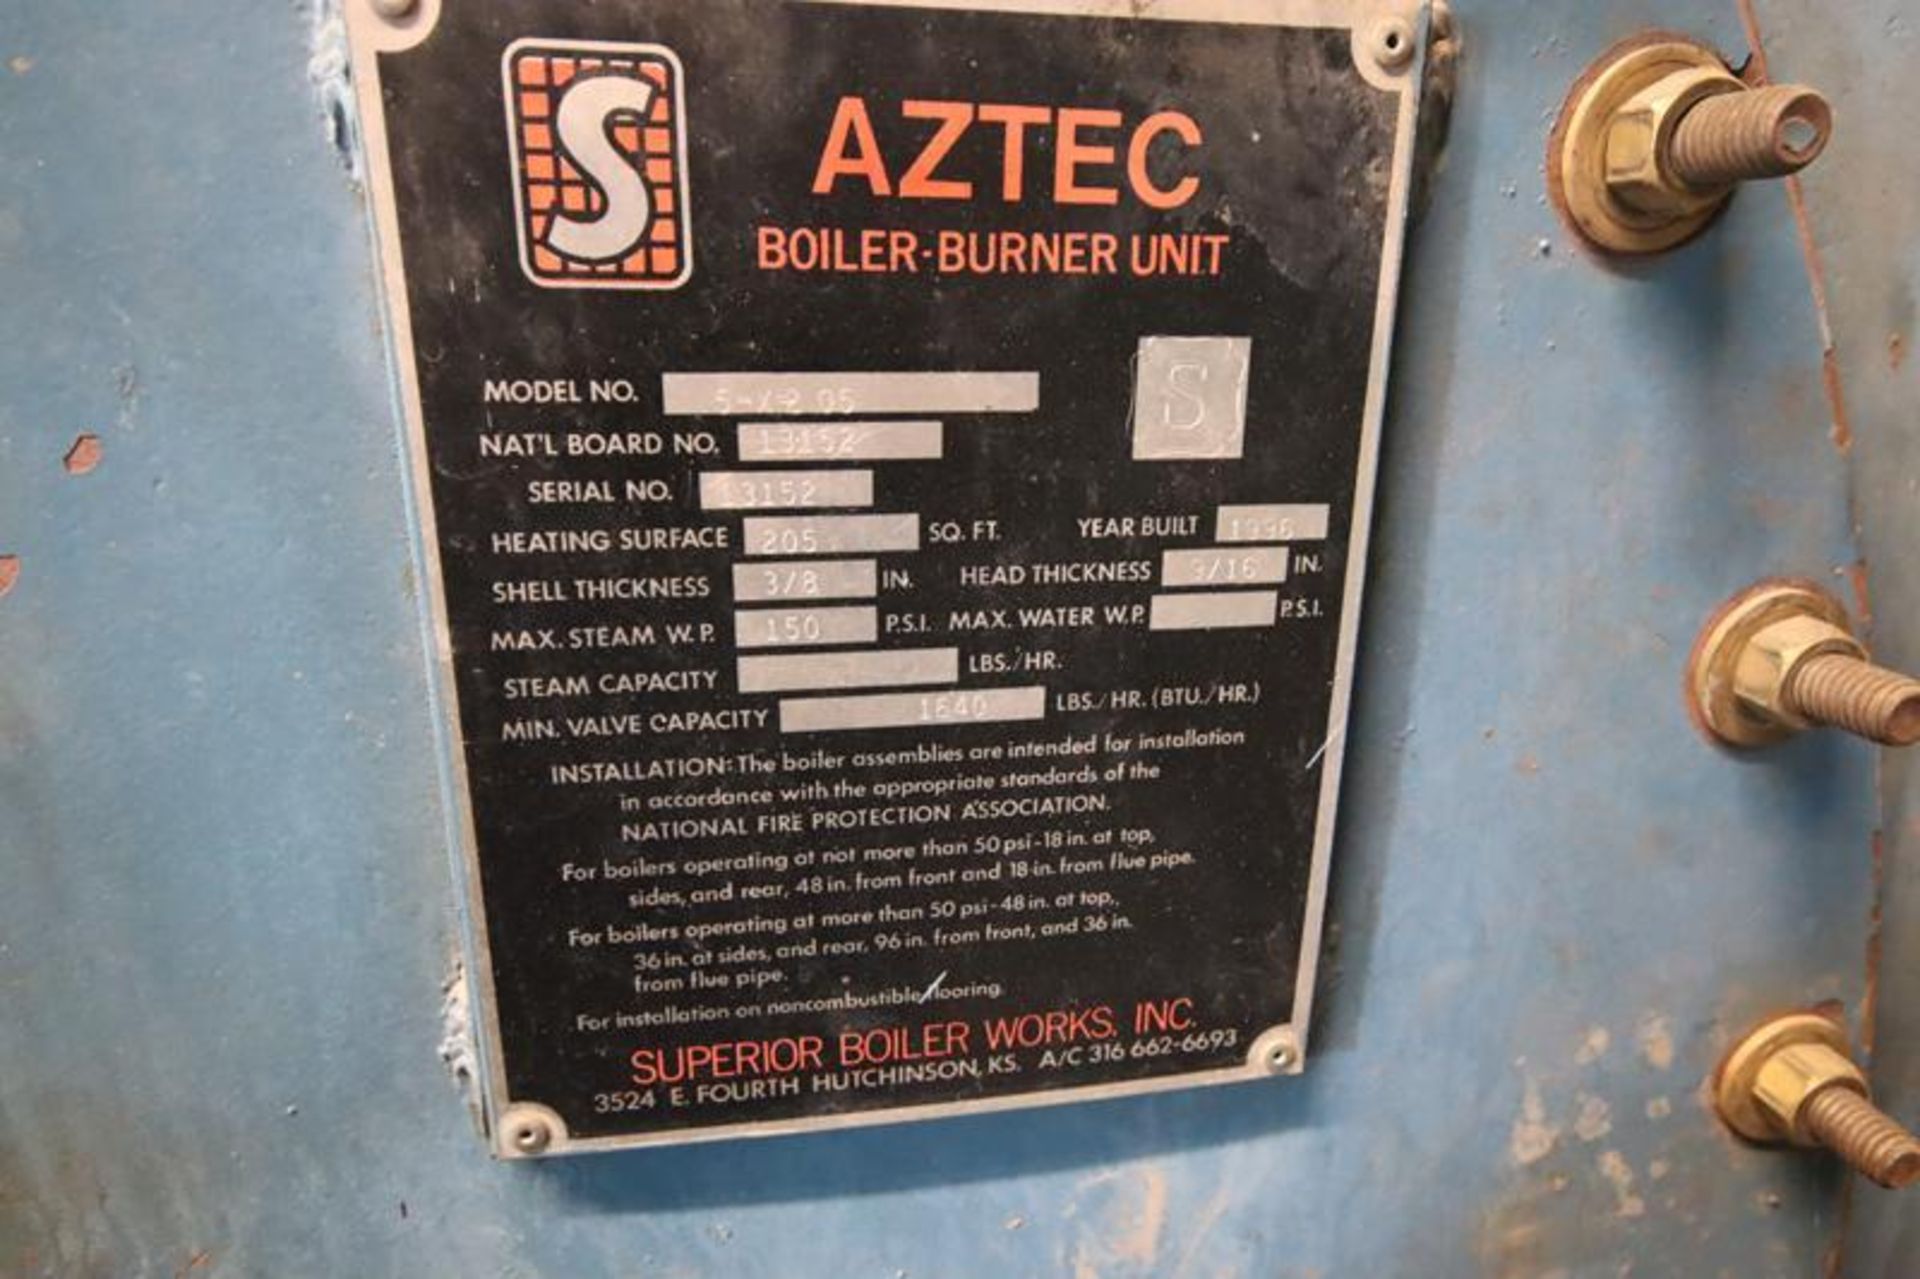 Aztec Superior model 5-X-205 Natural gas fired boiler. S/N 13152, 1996, 1650 lb.'s per hour steam ca - Image 3 of 3